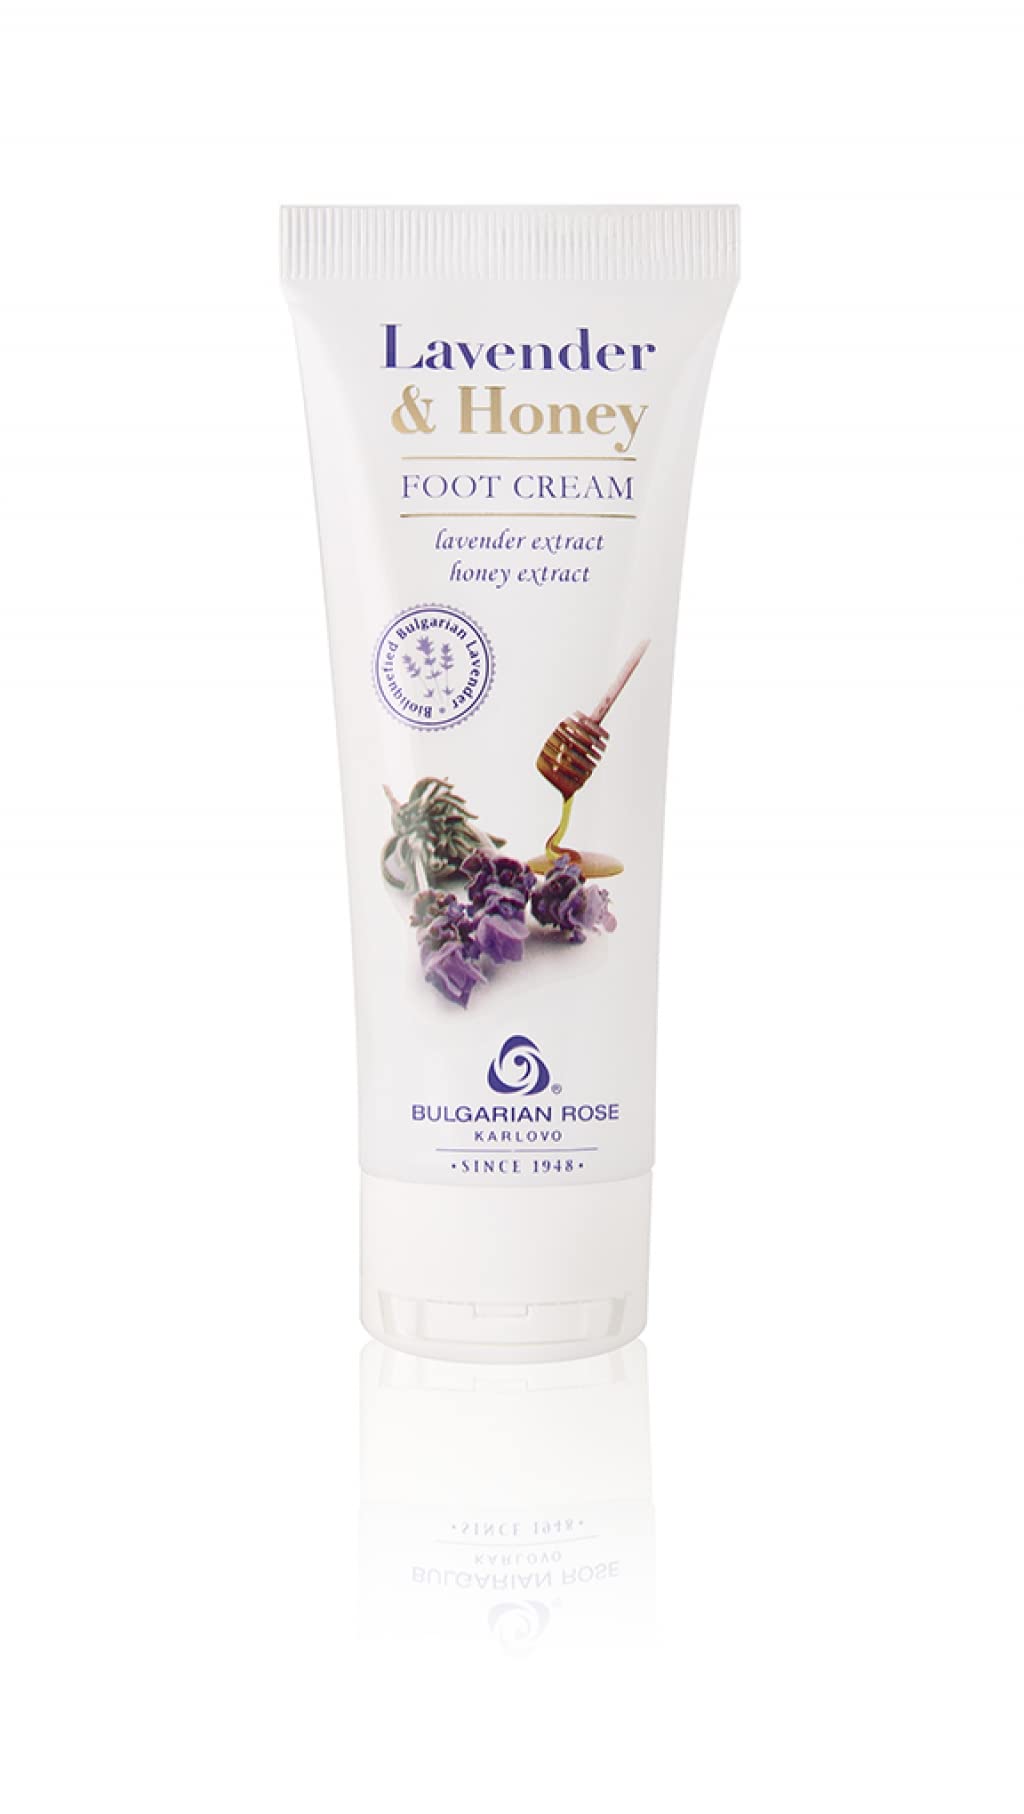 Rose Bulgarian Lavender and Honey Foot Cream with Natural Lavender & Honey Extracts for moisturizing and rejuvenating your feet